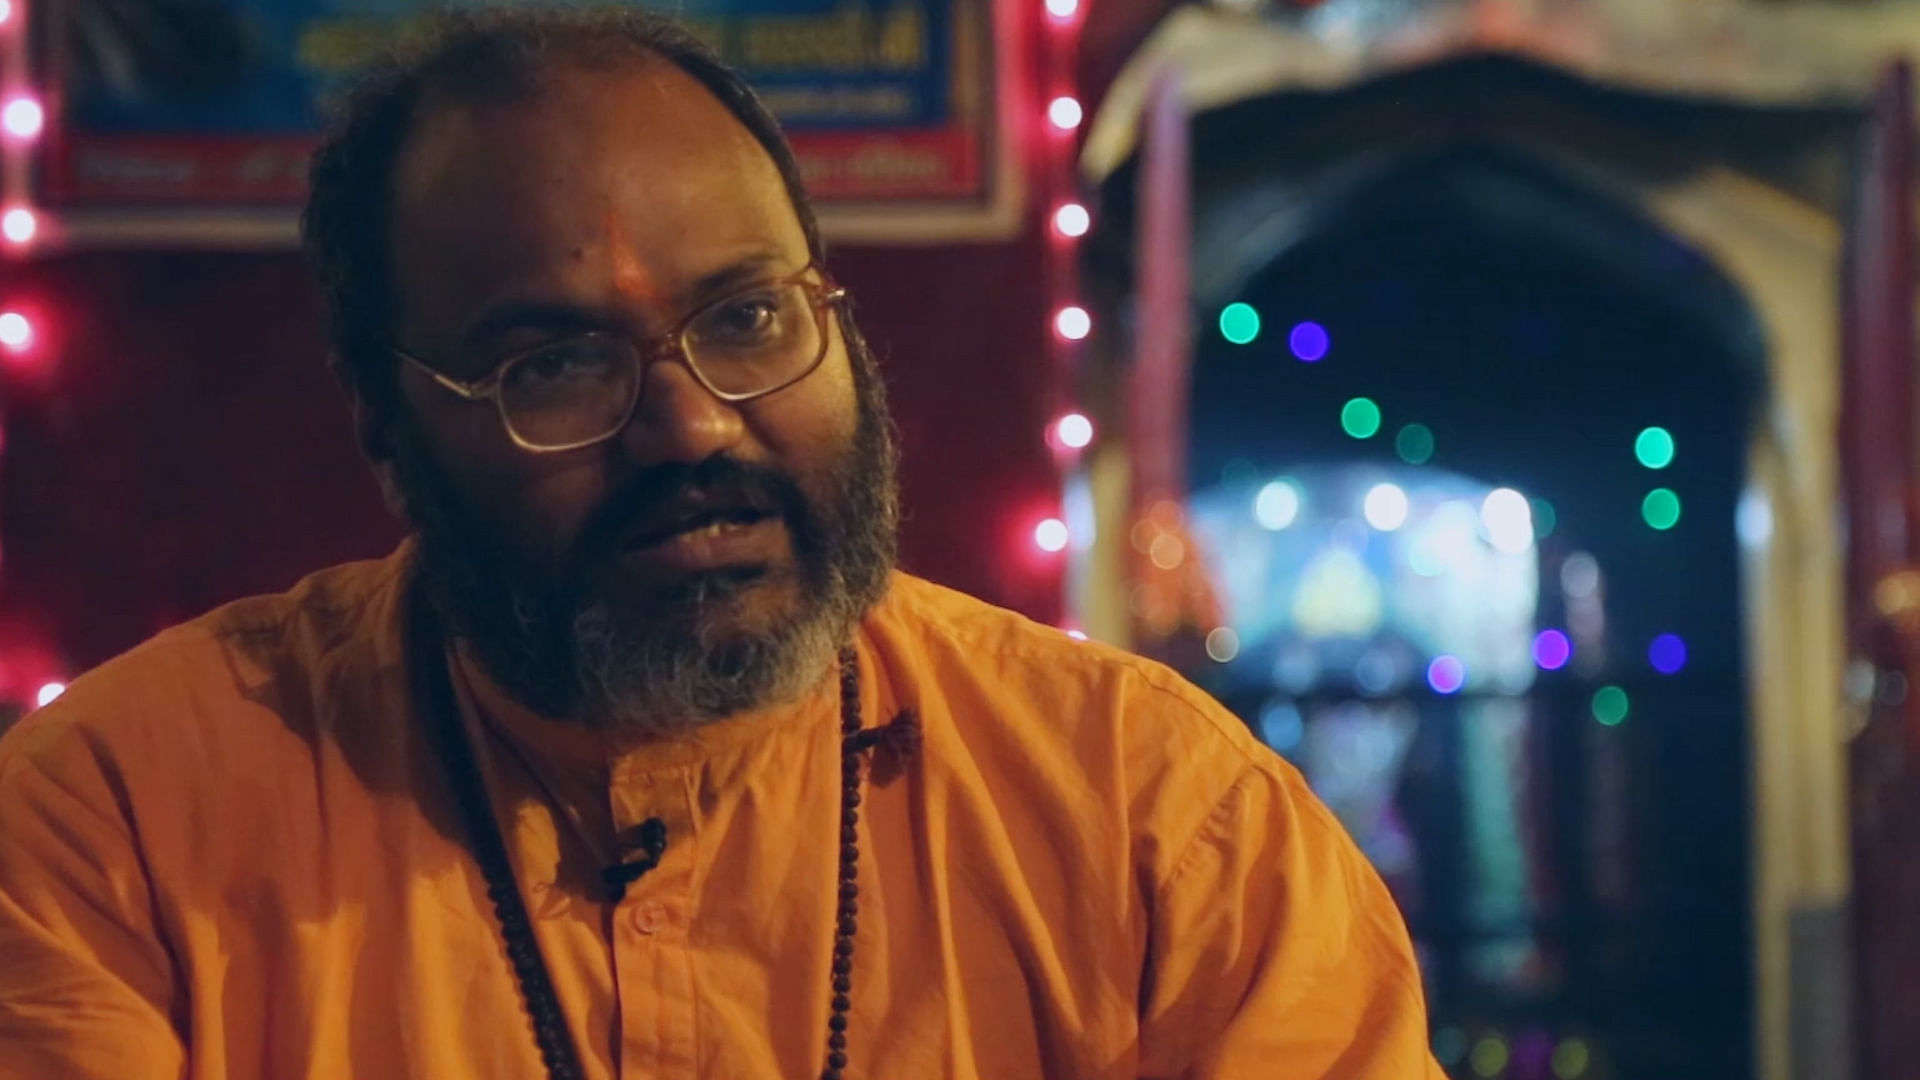 Mahant Narsinghanand Saraswati of the Dasna Devi Mandir spoke to The Quint for a documentary in 2015.